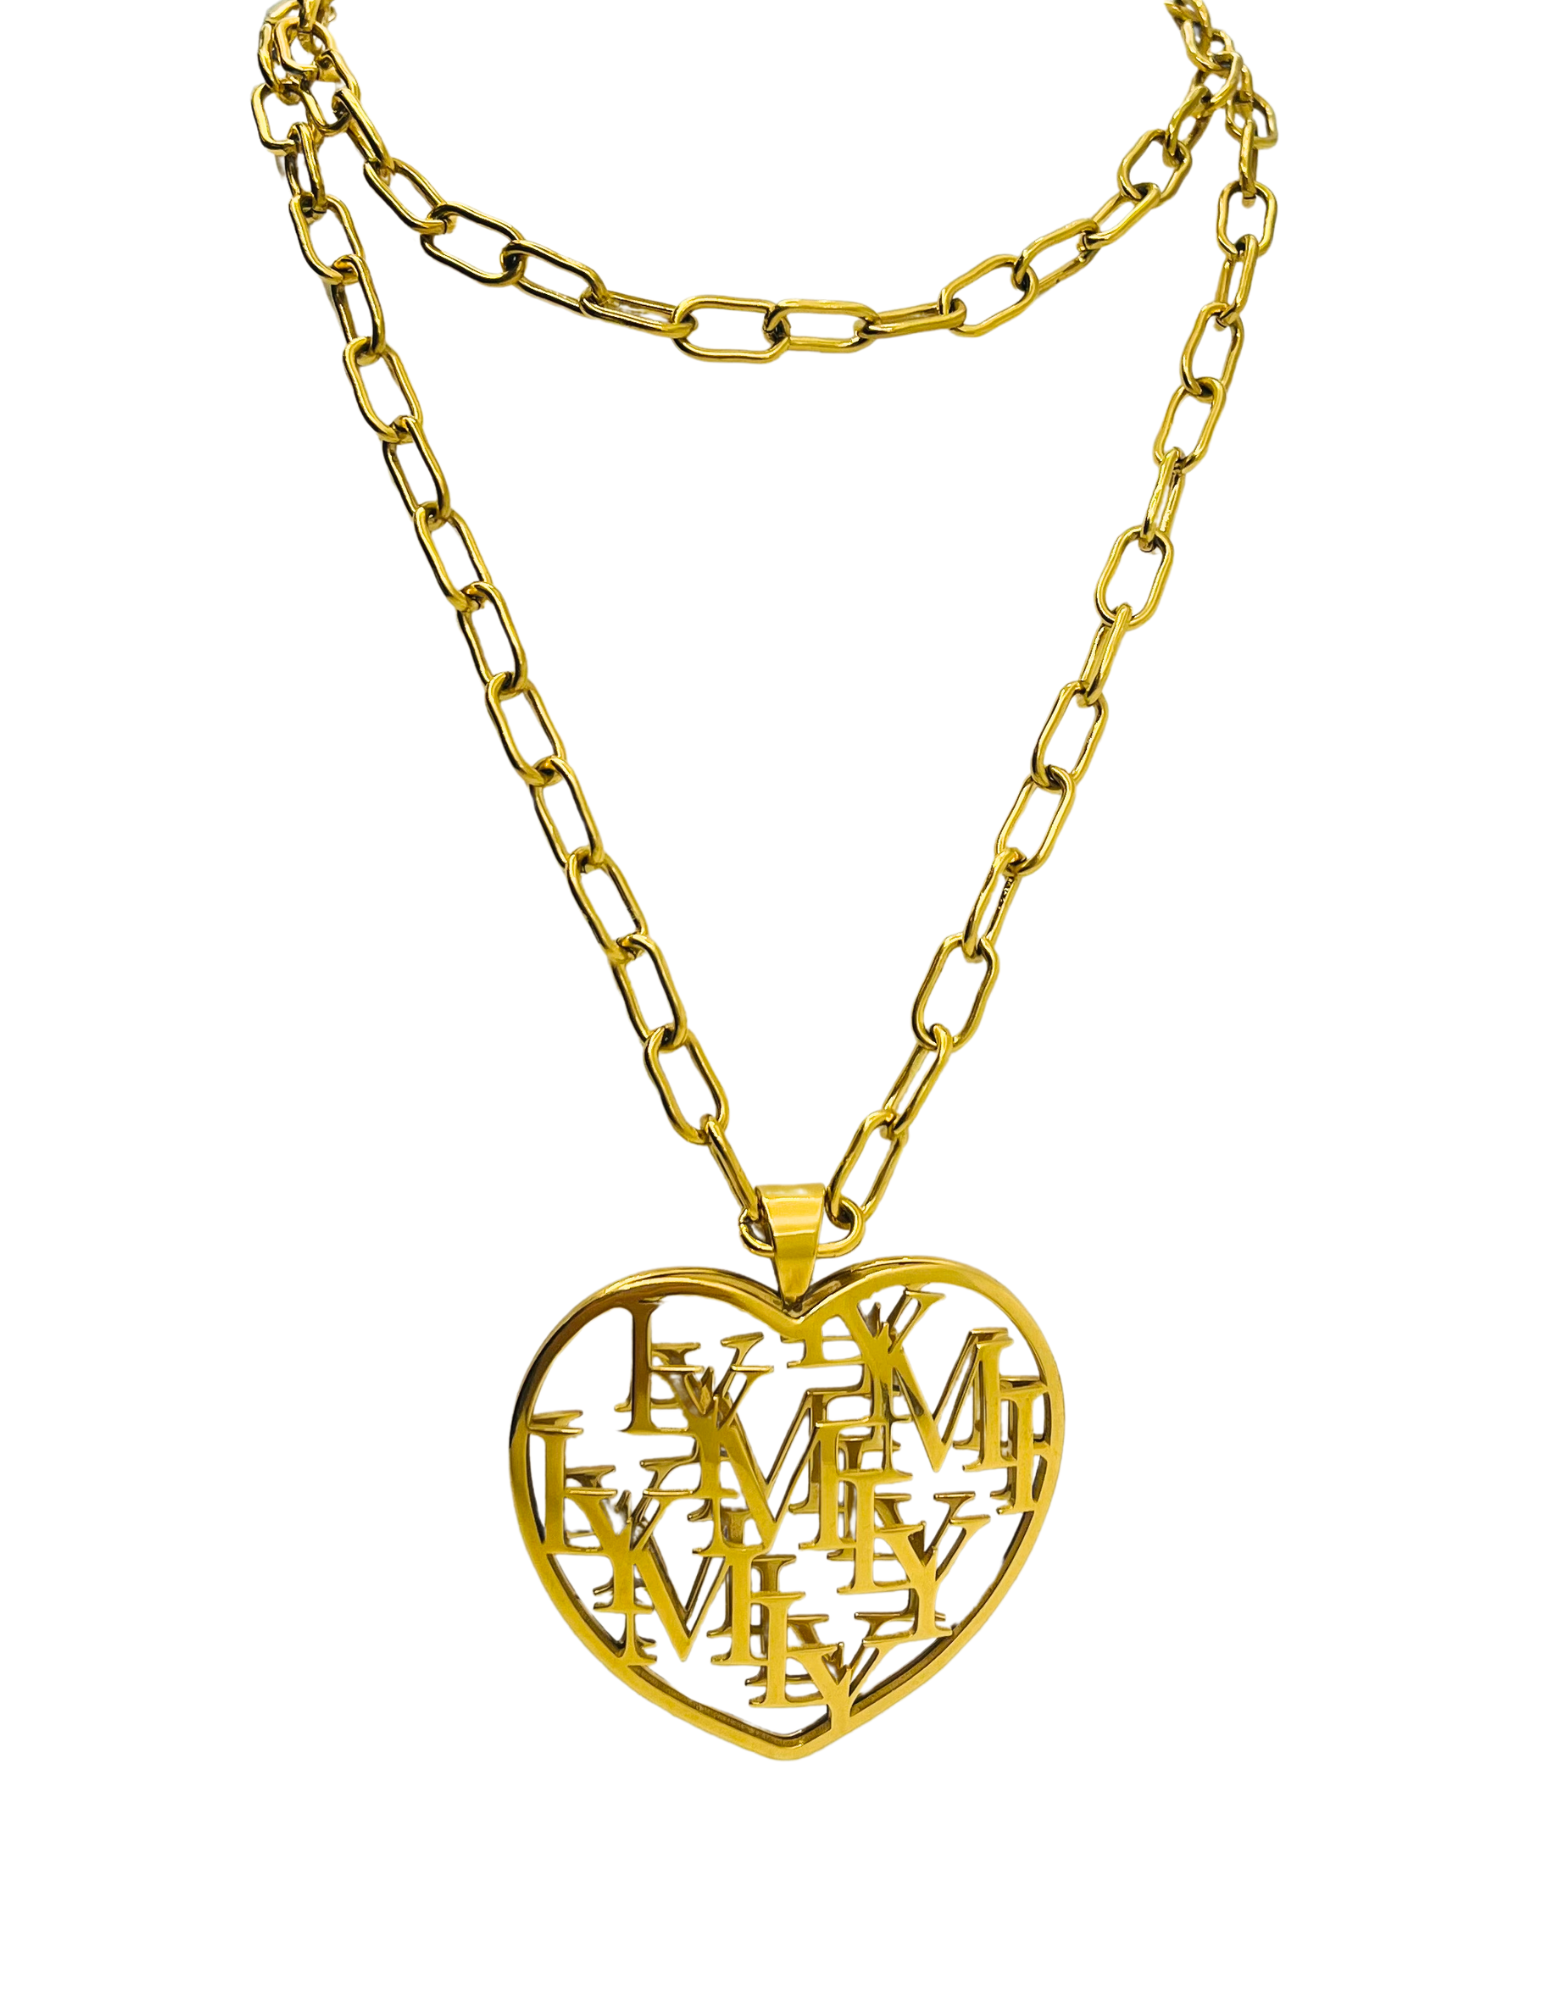 The LYM Large Heart Gold Necklace